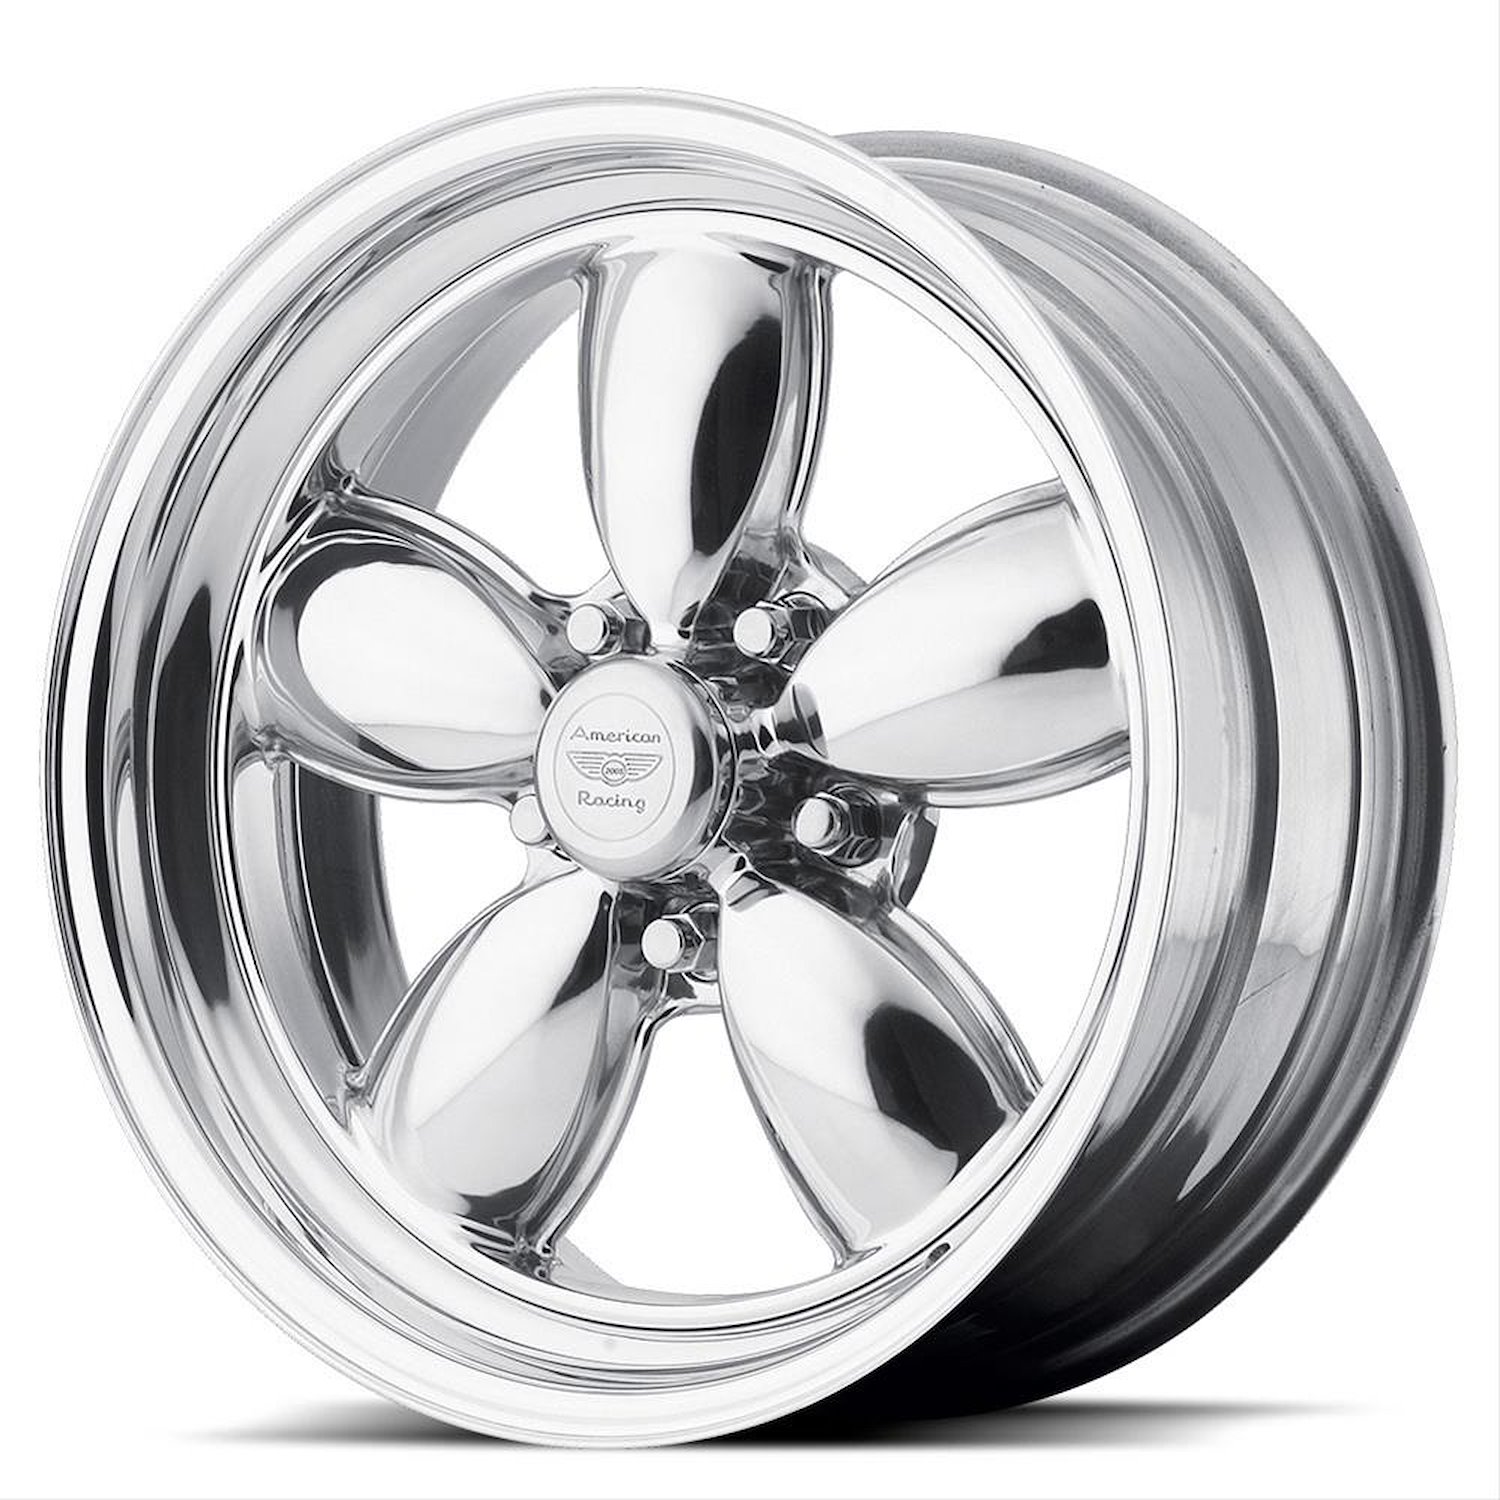 AMERICAN RACING CLASSIC 200S TWO-PIECE POLISHED 15 x 7 5X4.75 13 4.51